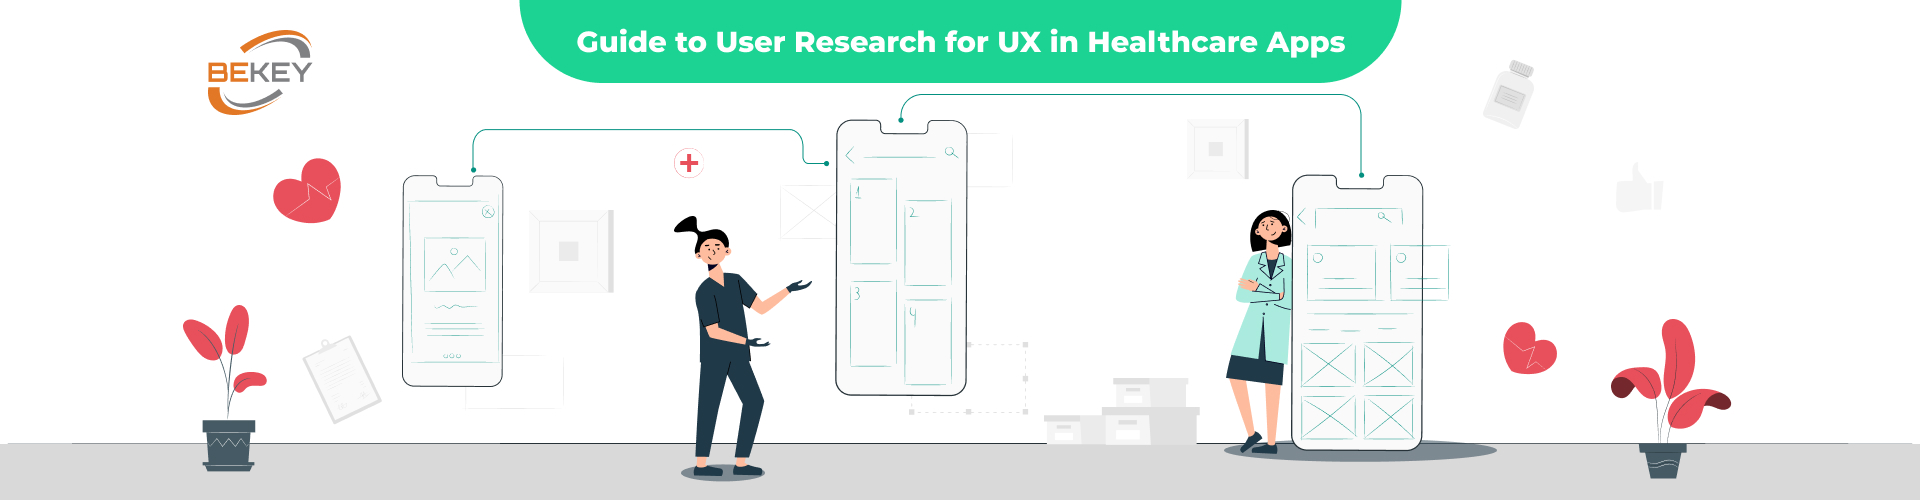 Guide to User Research for UX in Healthcare Apps